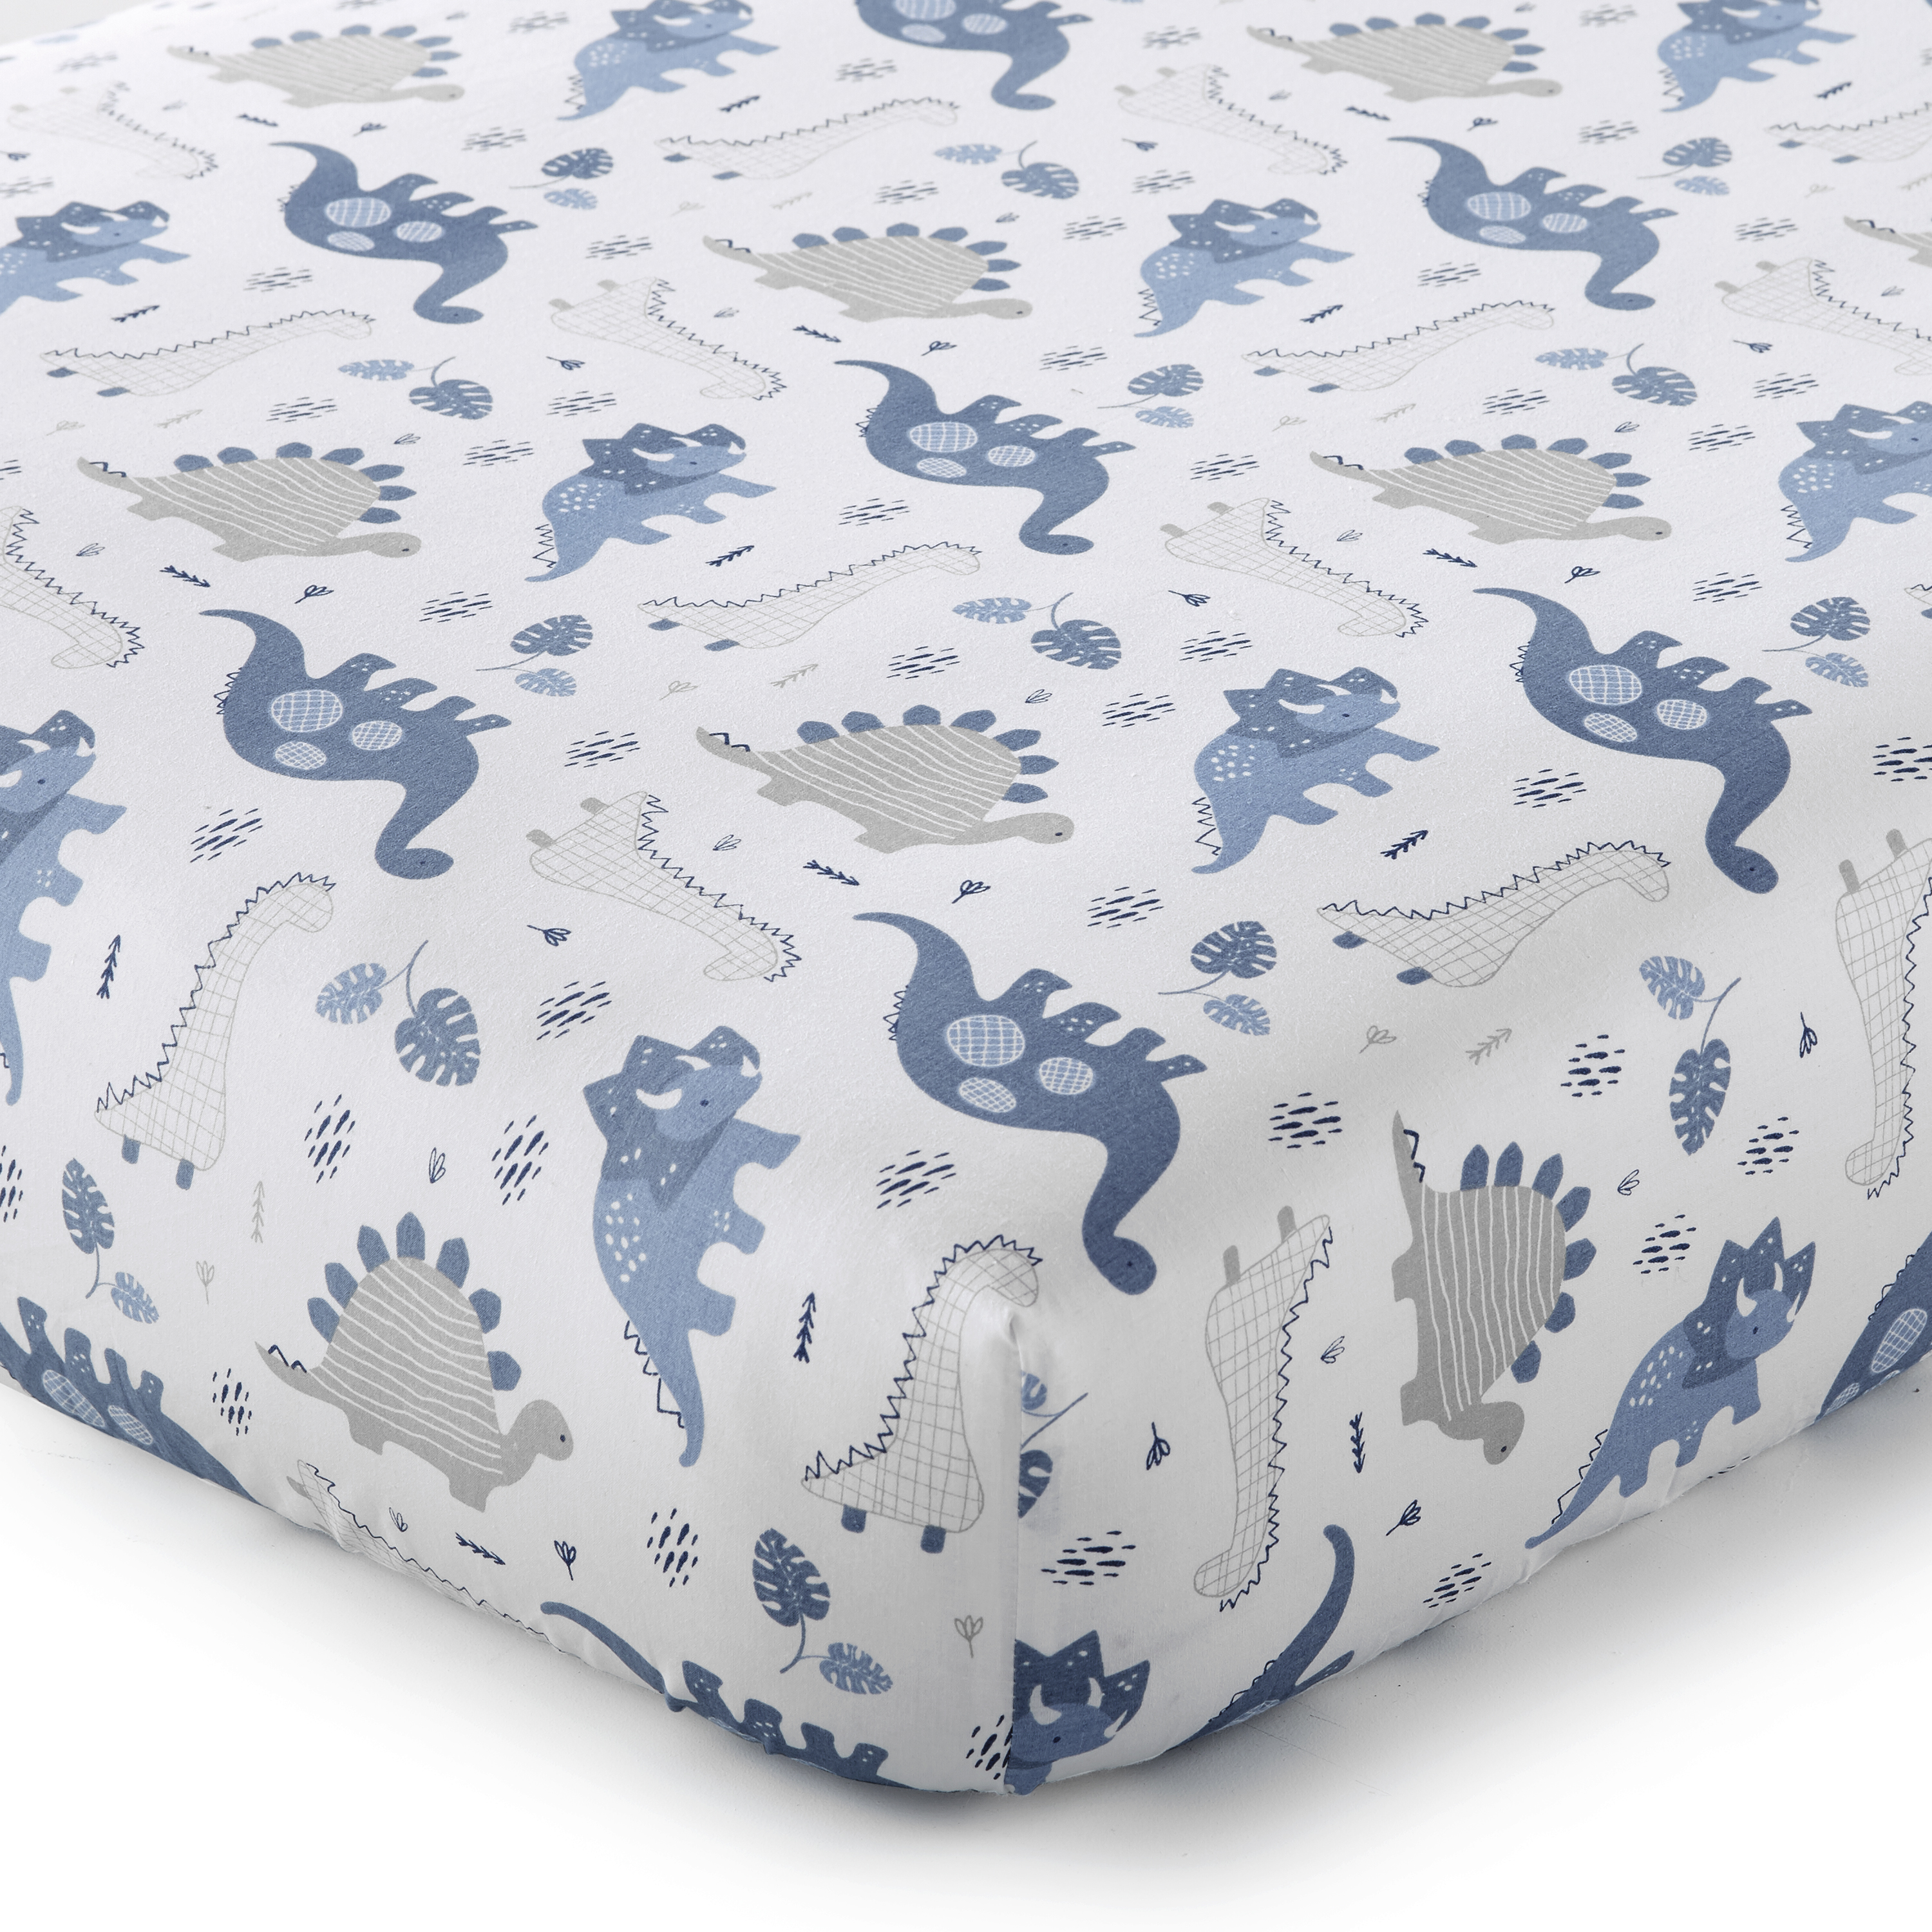 Levtex Baby - Kipton Crib Bed Set - Baby Nursery Set - Grey, White and Blue - Dinosaurs and Leaves - 4 Piece Set Includes Quilt, Fitted Sheet, Wall Decal & Skirt/Dust Ruffle - image 3 of 6